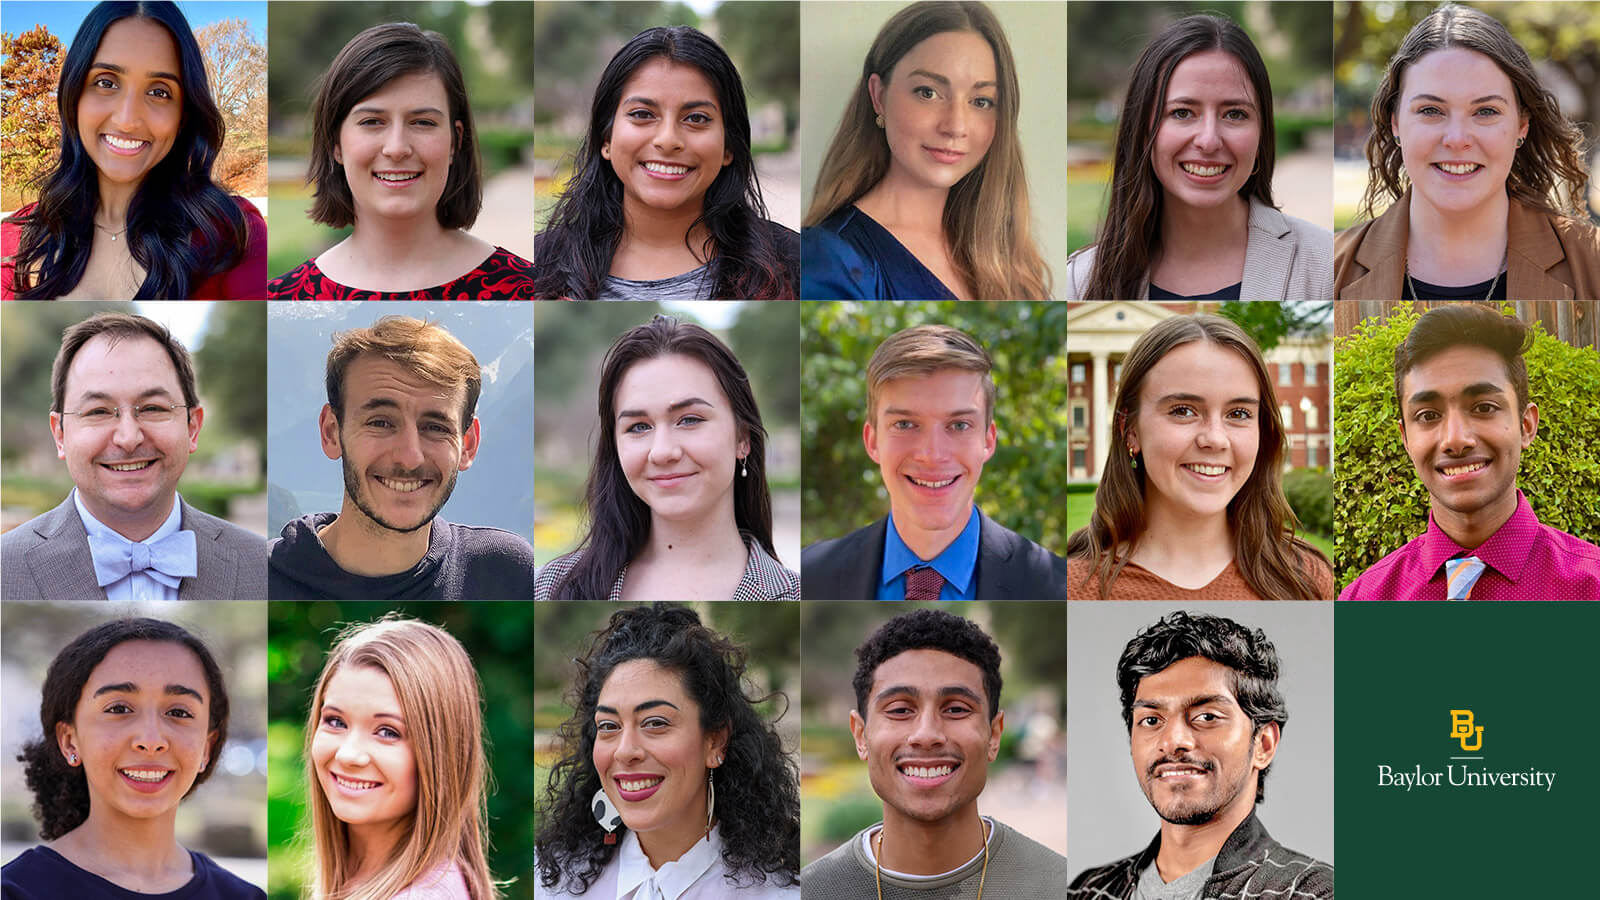 Photos of 17 Baylor students are shown, representing recipients of the prestigious Fulbright, Truman, Clinton, Goldwater, Boren, Critical Language, Marshall and Churchill scholarships